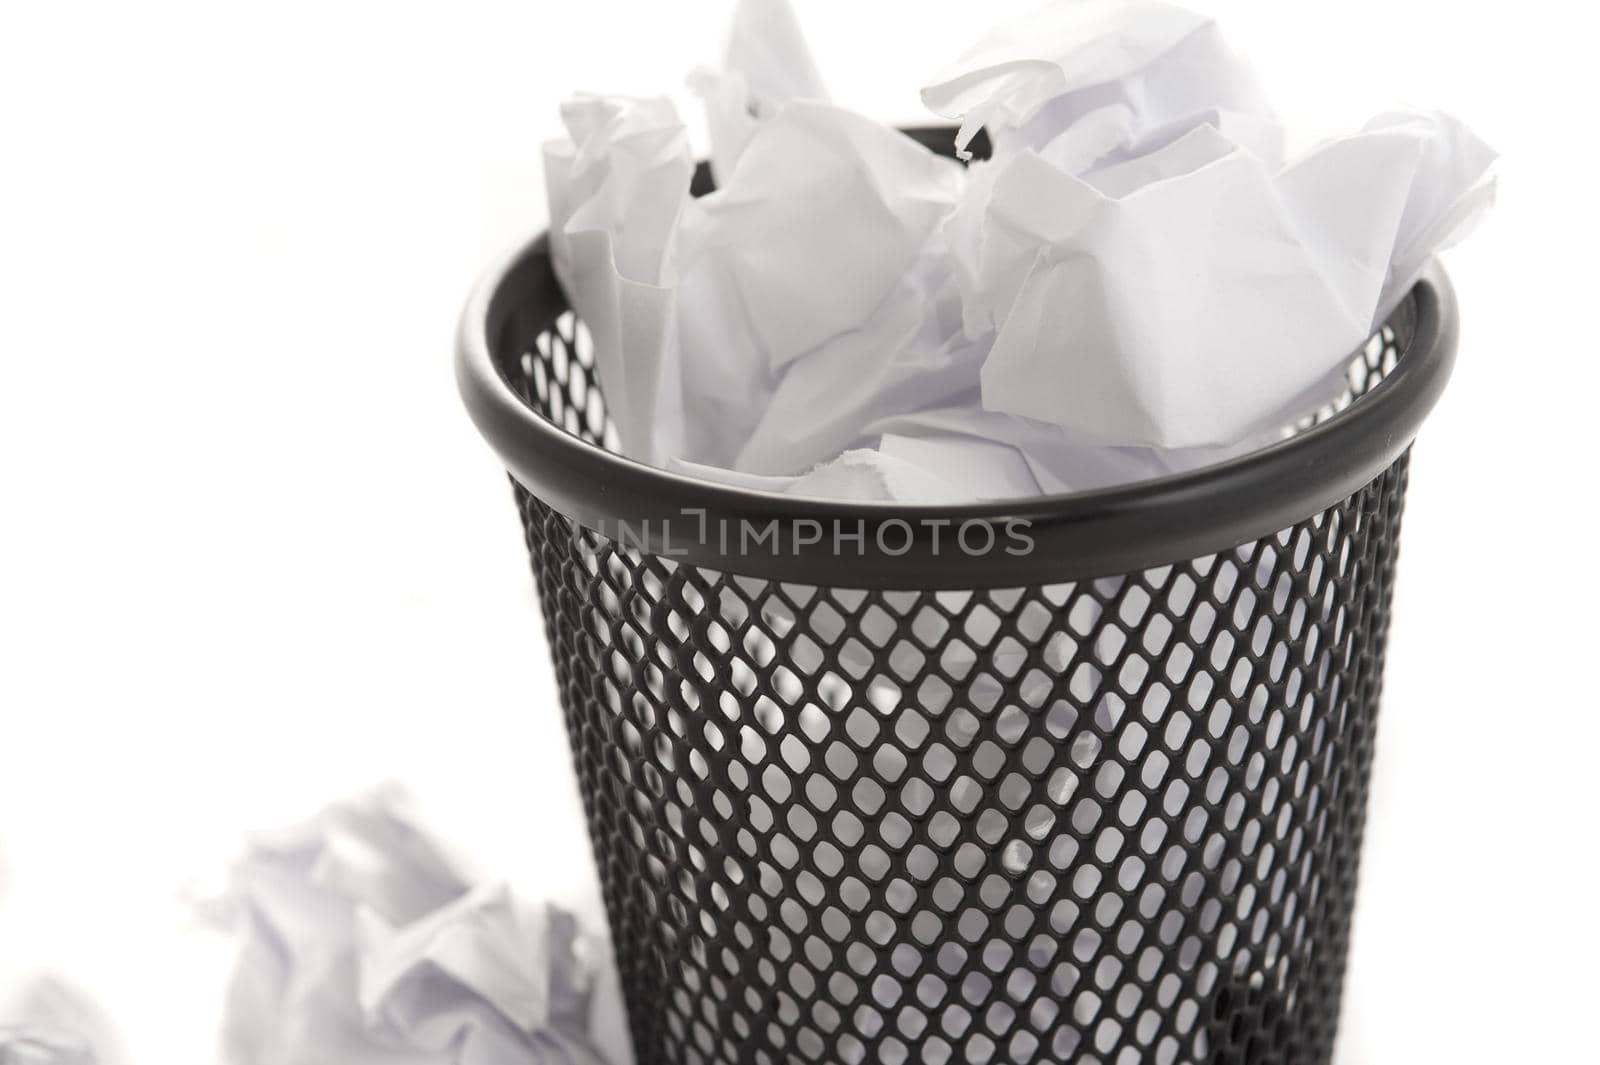 Wastepaper bin filled to overflowing with crumpled white paper